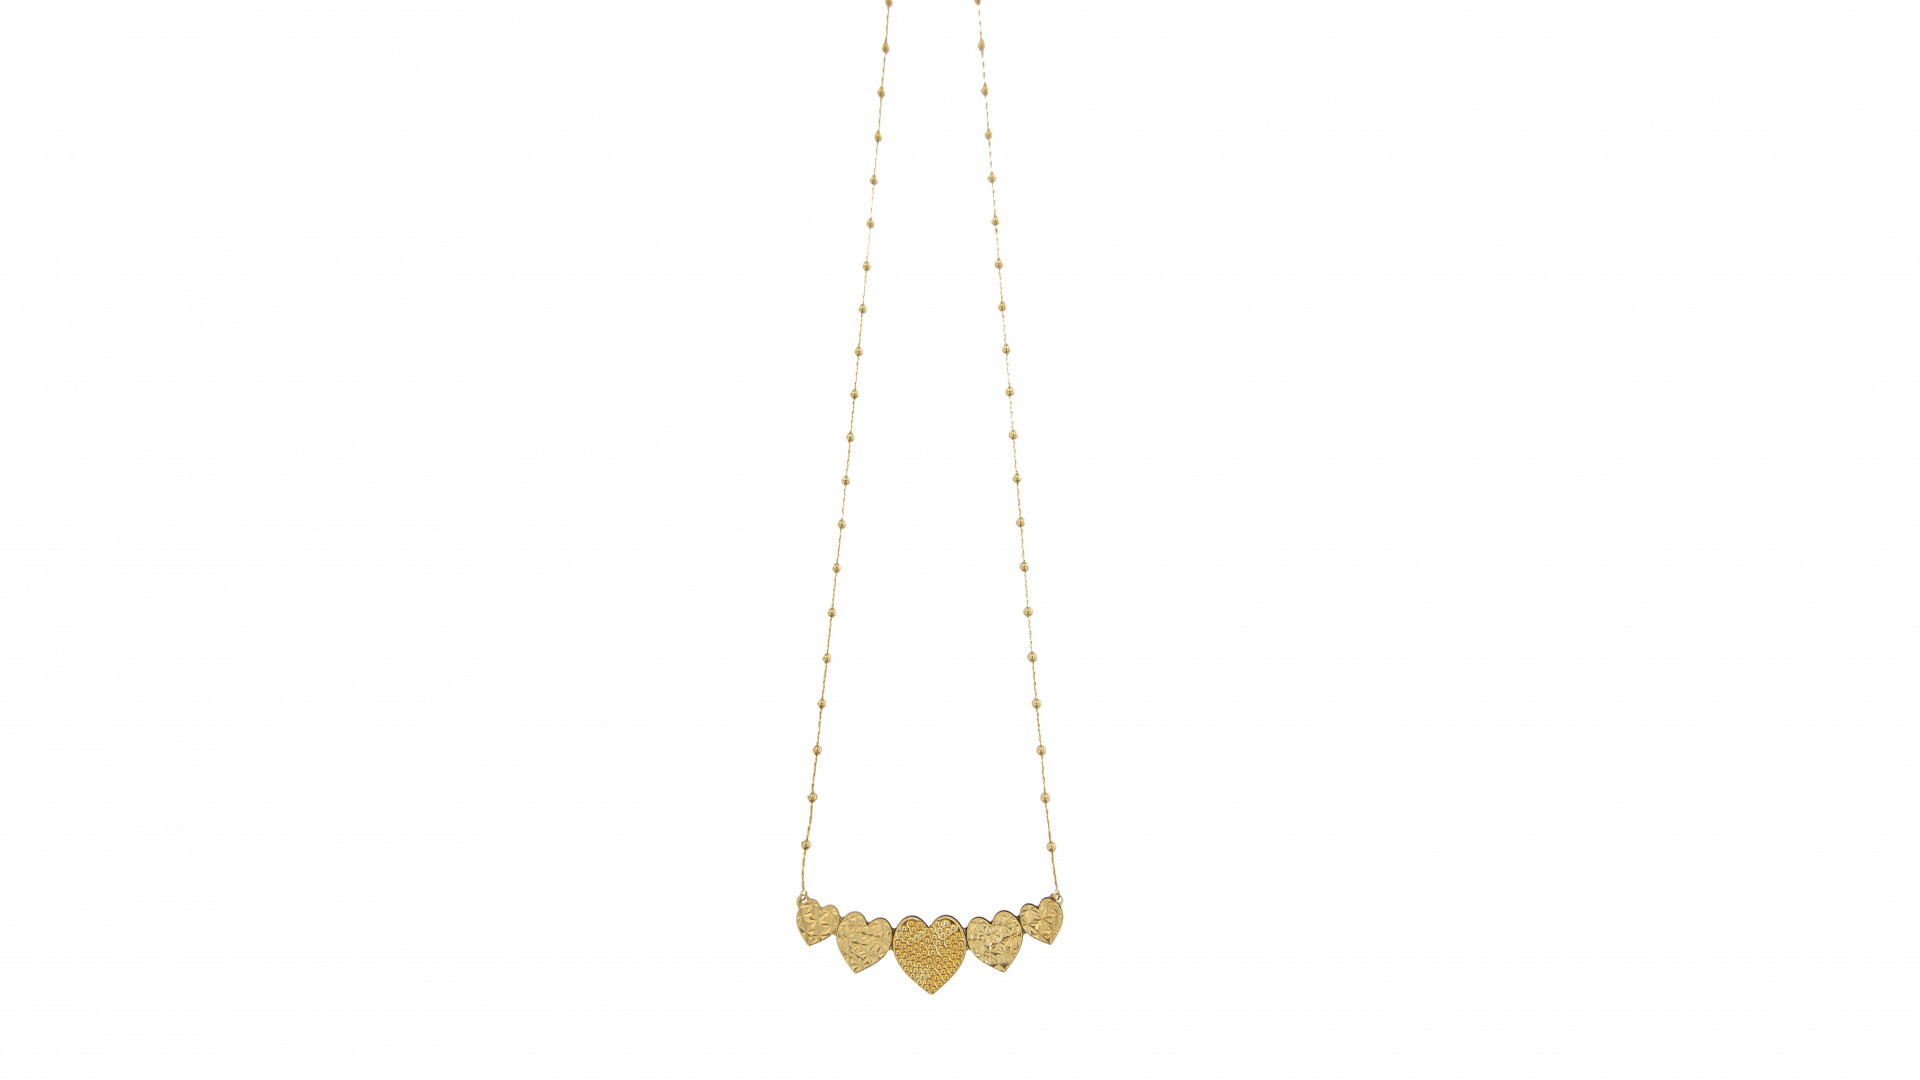 golden necklace with hearth shaped charms